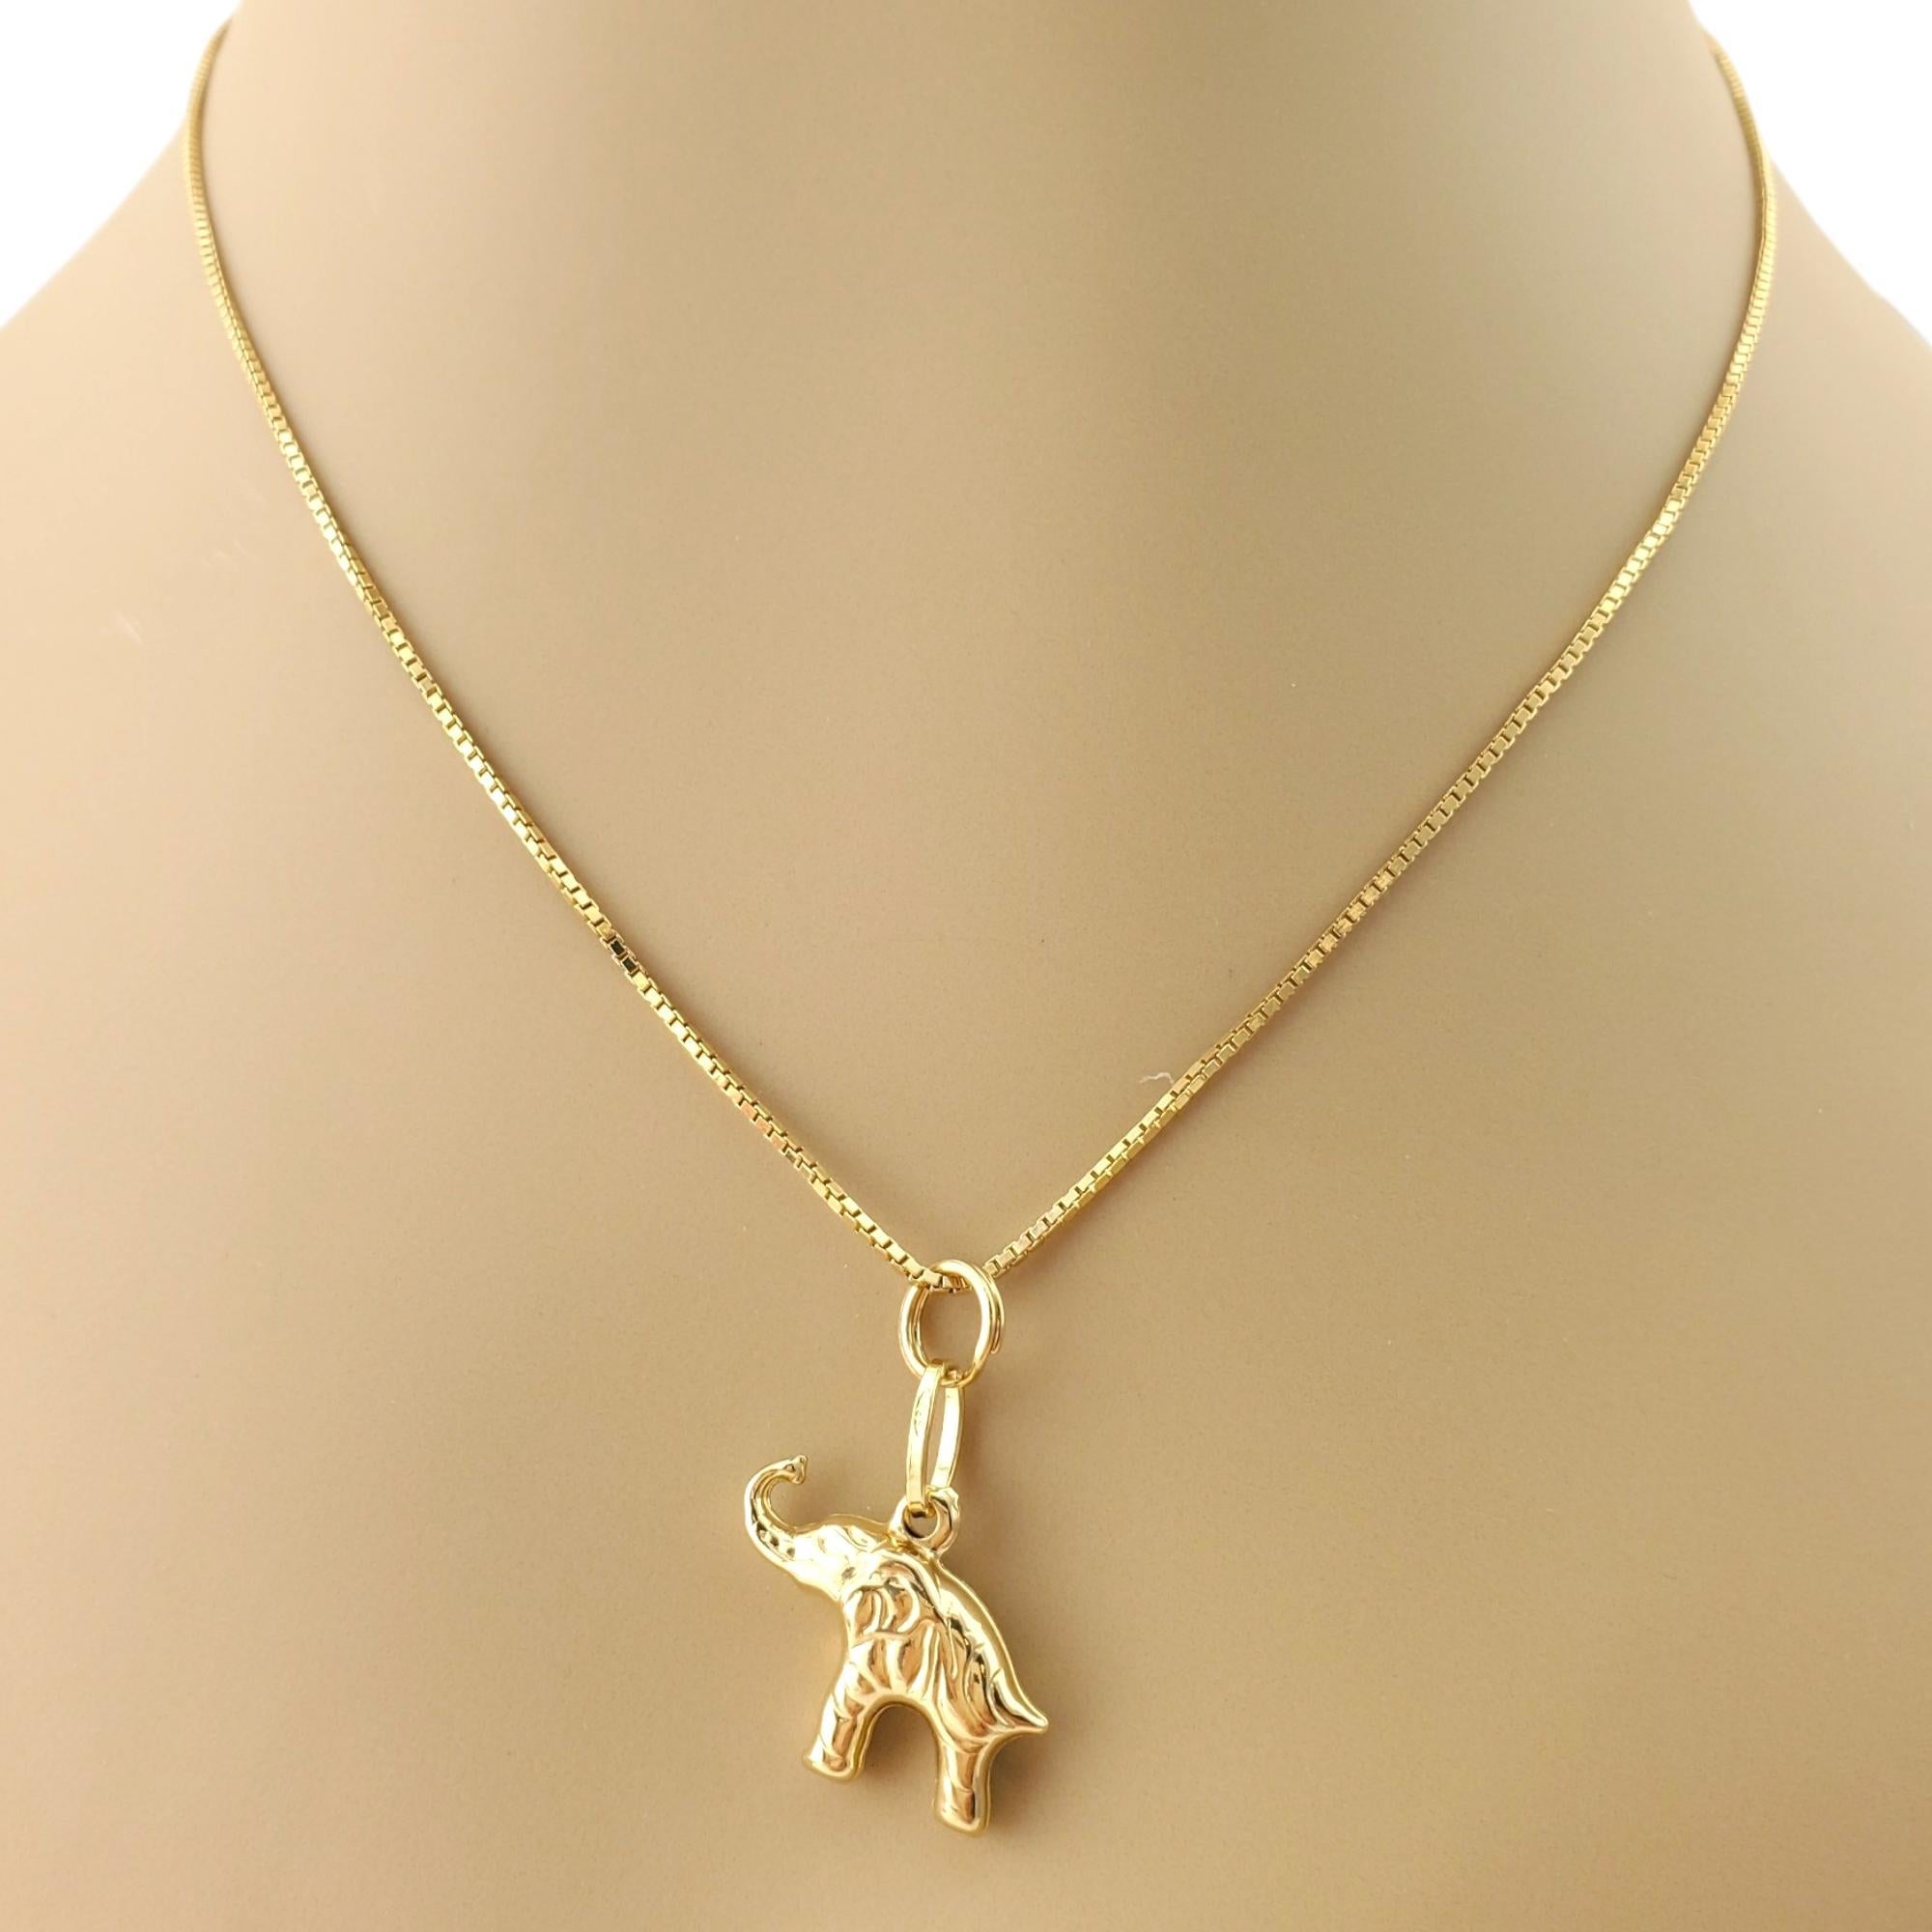 14K Yellow Gold Elephant Charm #17440 For Sale 2